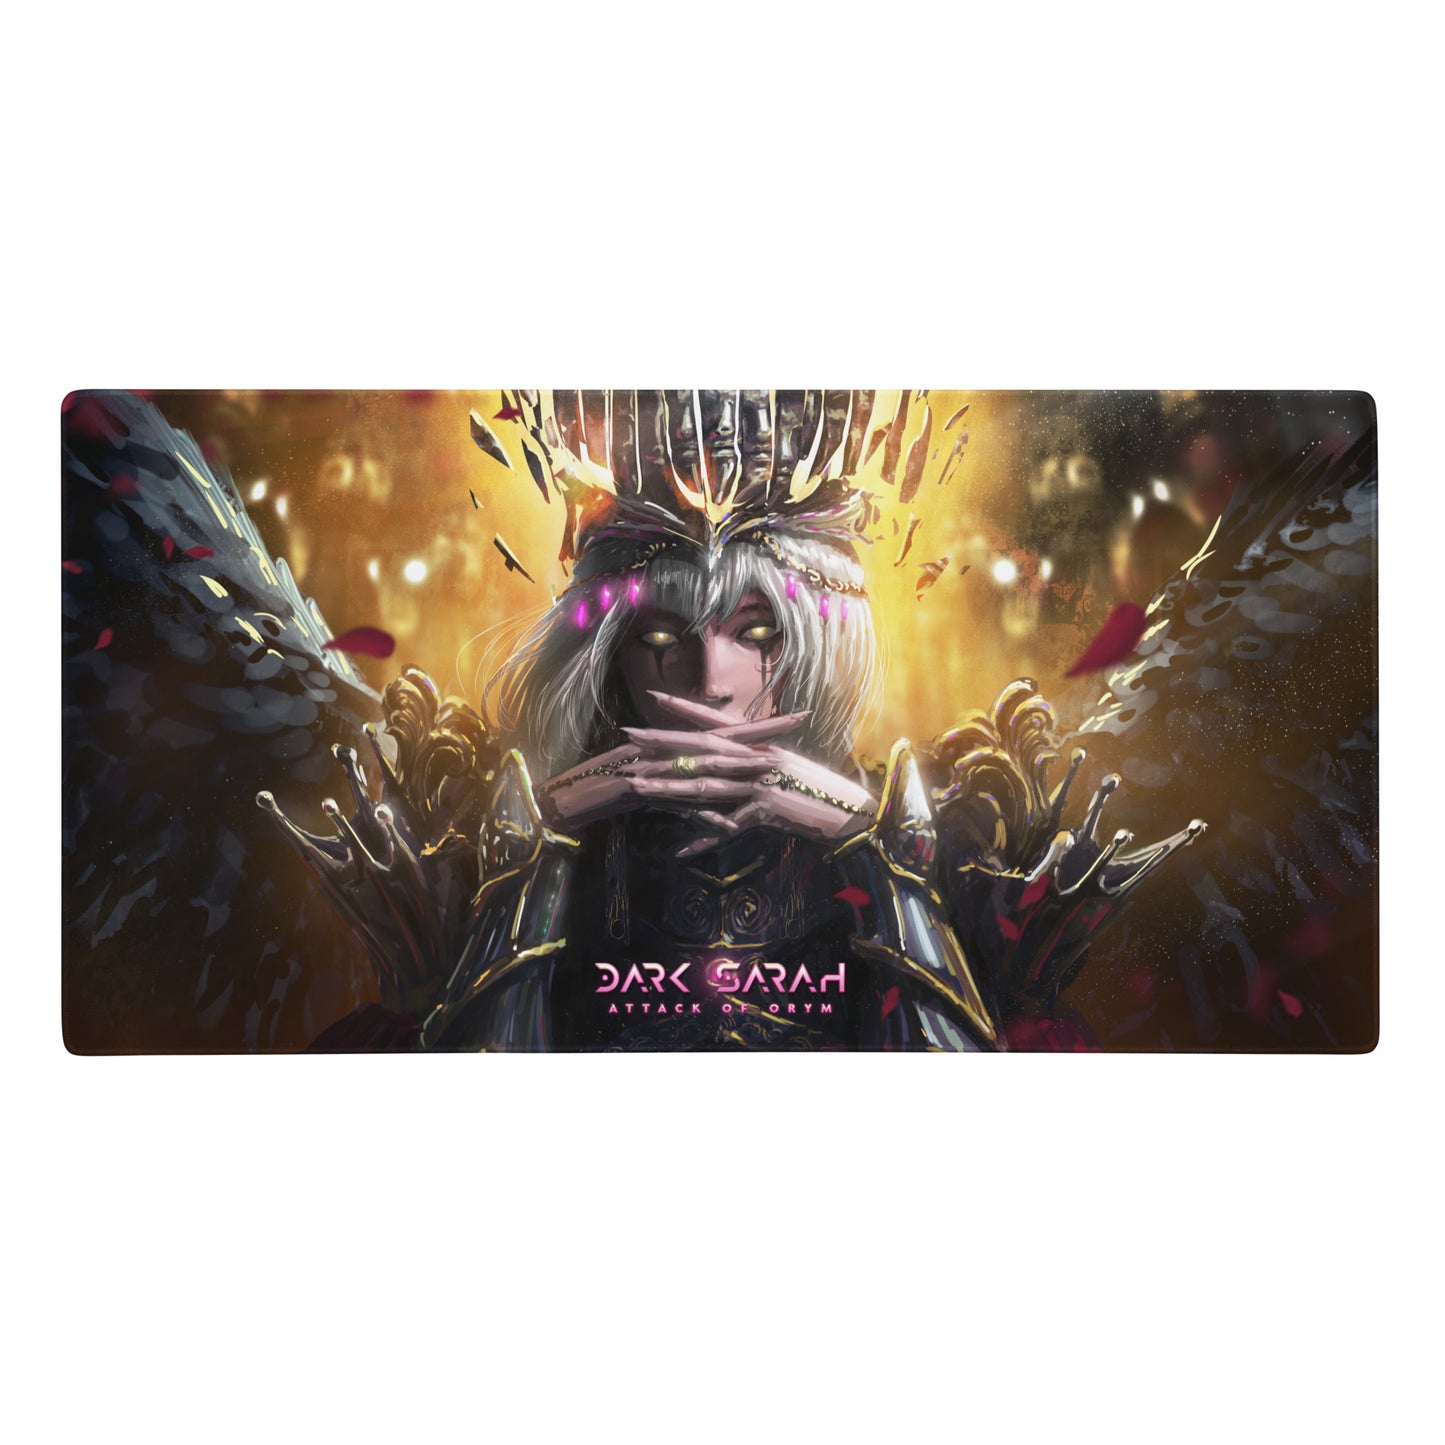 Attack Of Orym Gaming mouse pad